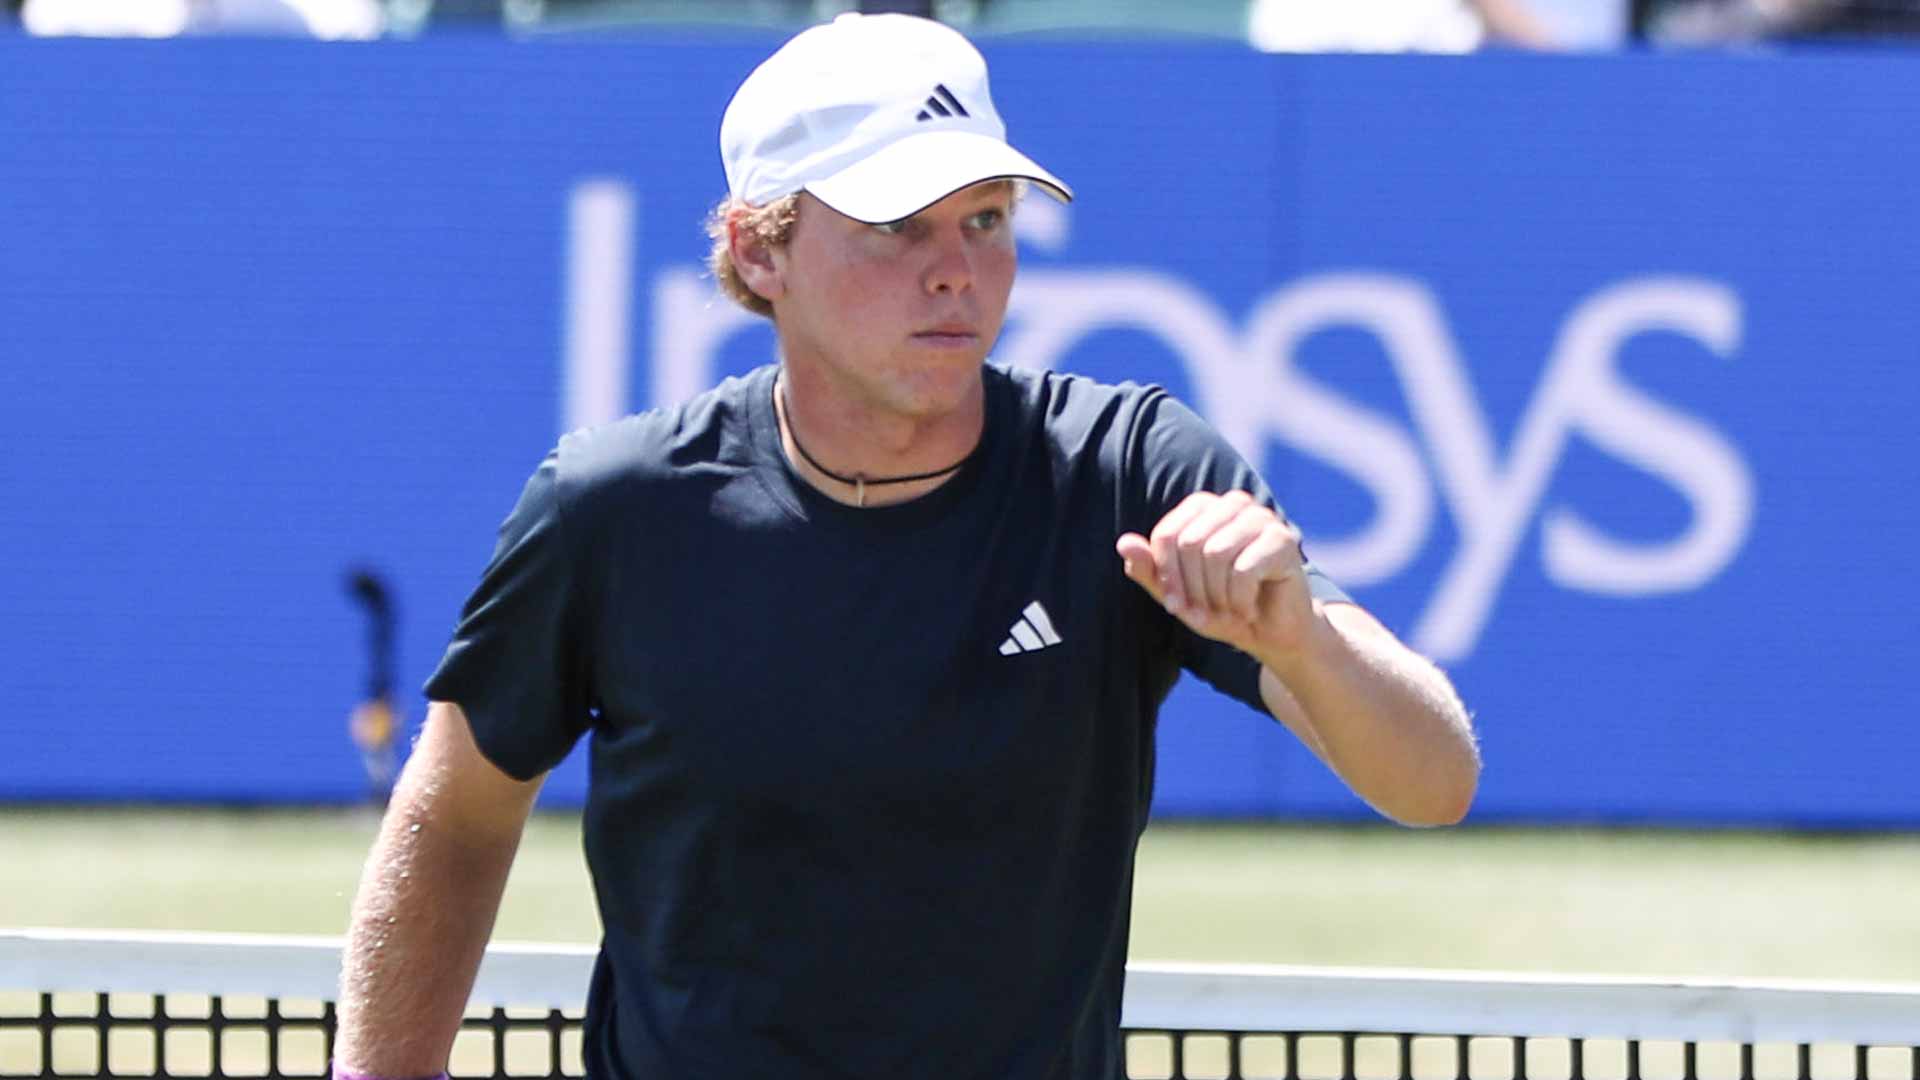 Alex Michelsen is pursuing his first ATP Tour title this week in Newport.